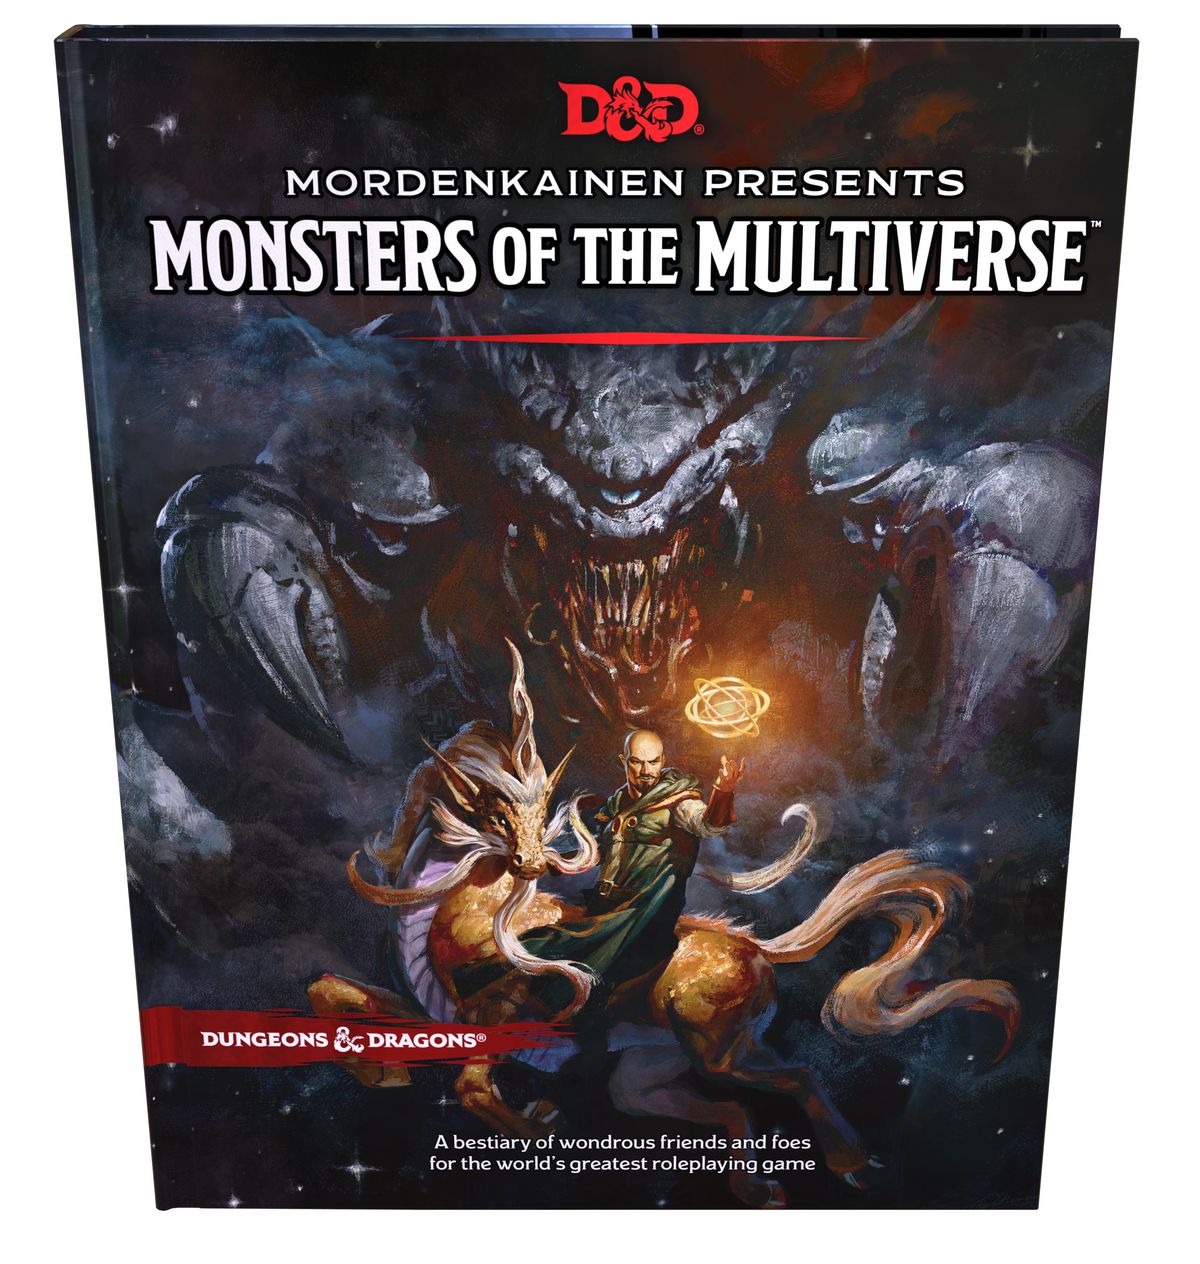 The standard cover of Mordenkainen Presents Monsters of the Multiverse shows the man himself riding a spectral unicorn. A one-eyed beast lurks in the shadows behind him.